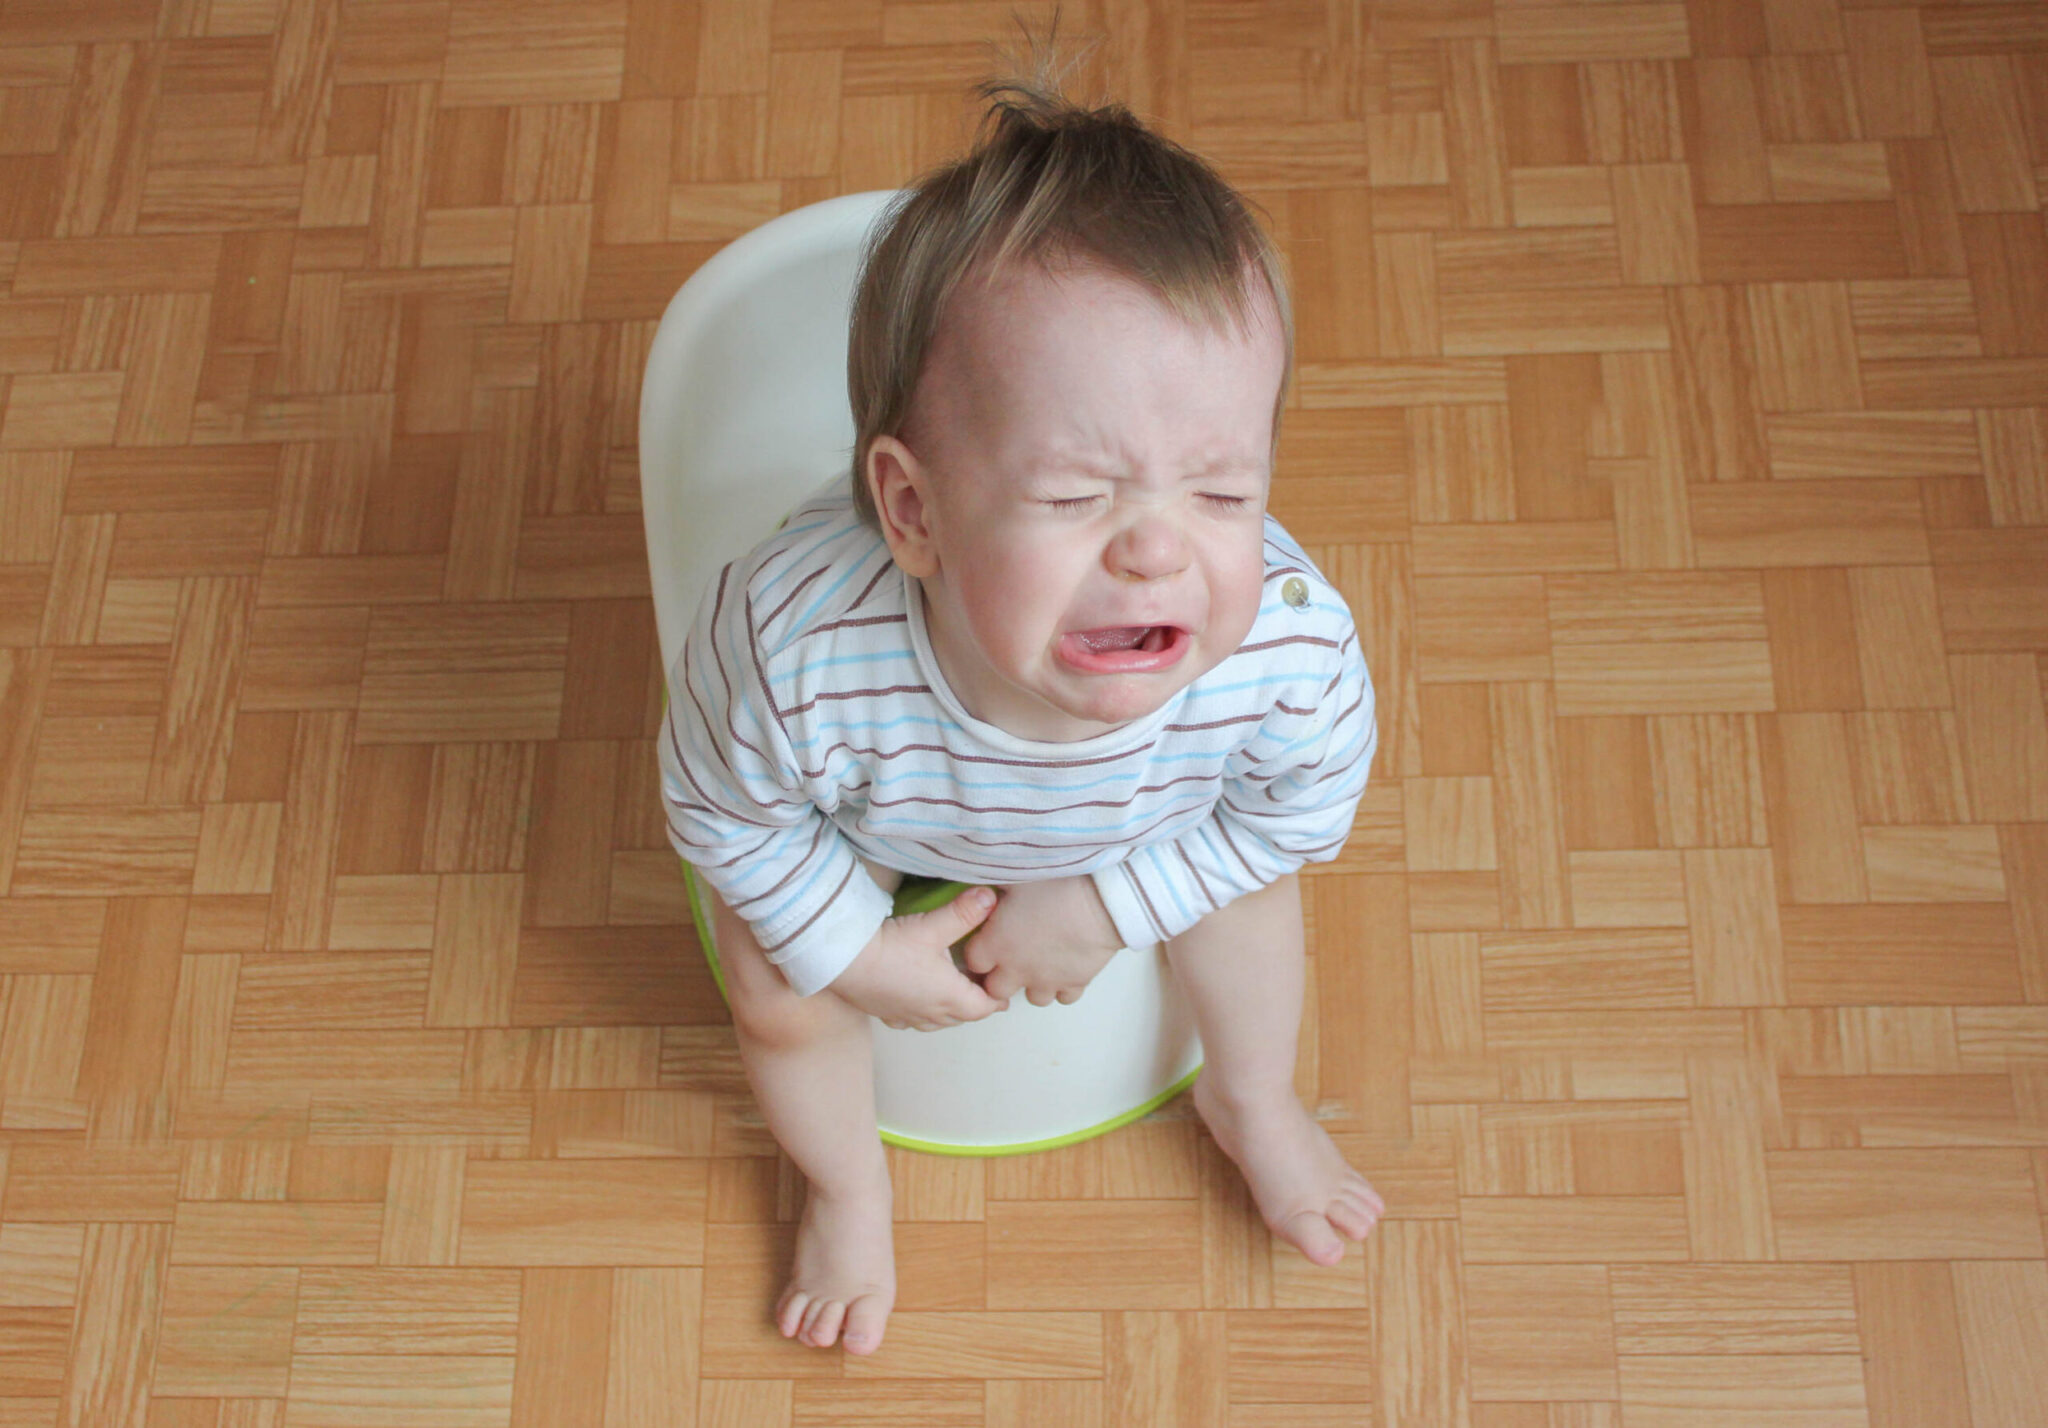 baby crying when going to toilet Training toilet potty upset baby preview therapy